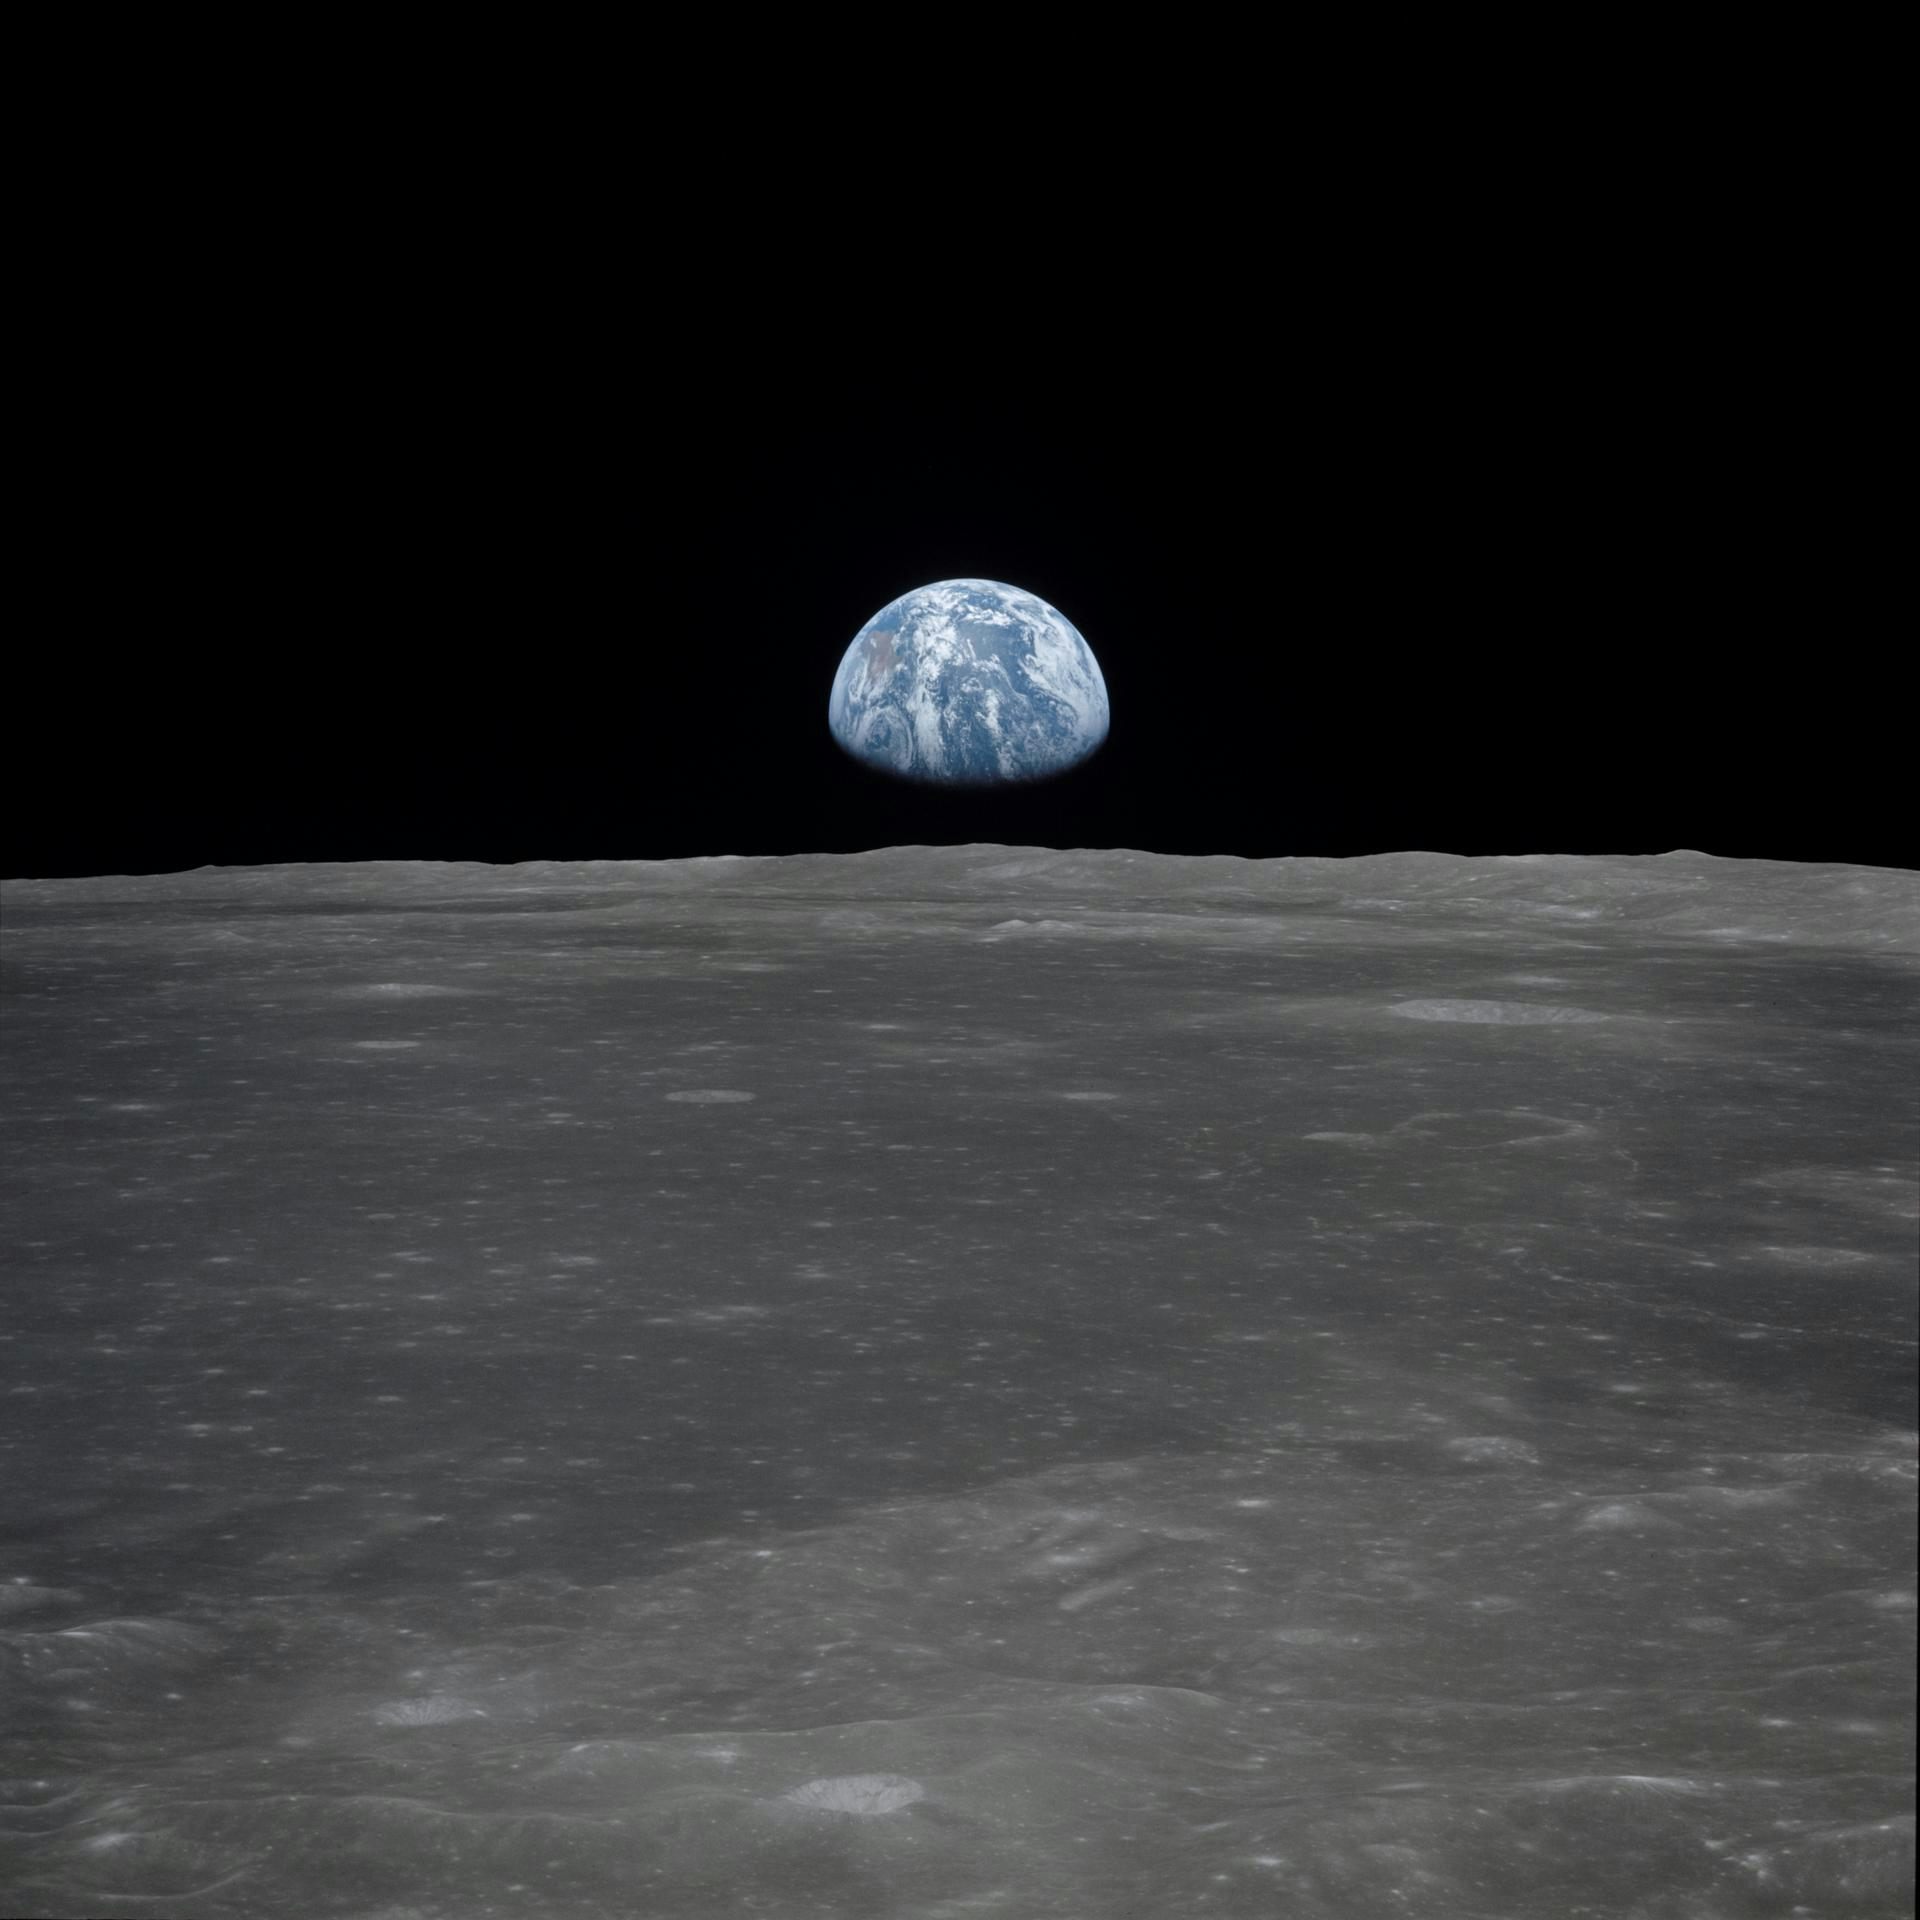 Foreground of a grey surface with a half lit Earth in the distance hanging in a black sky